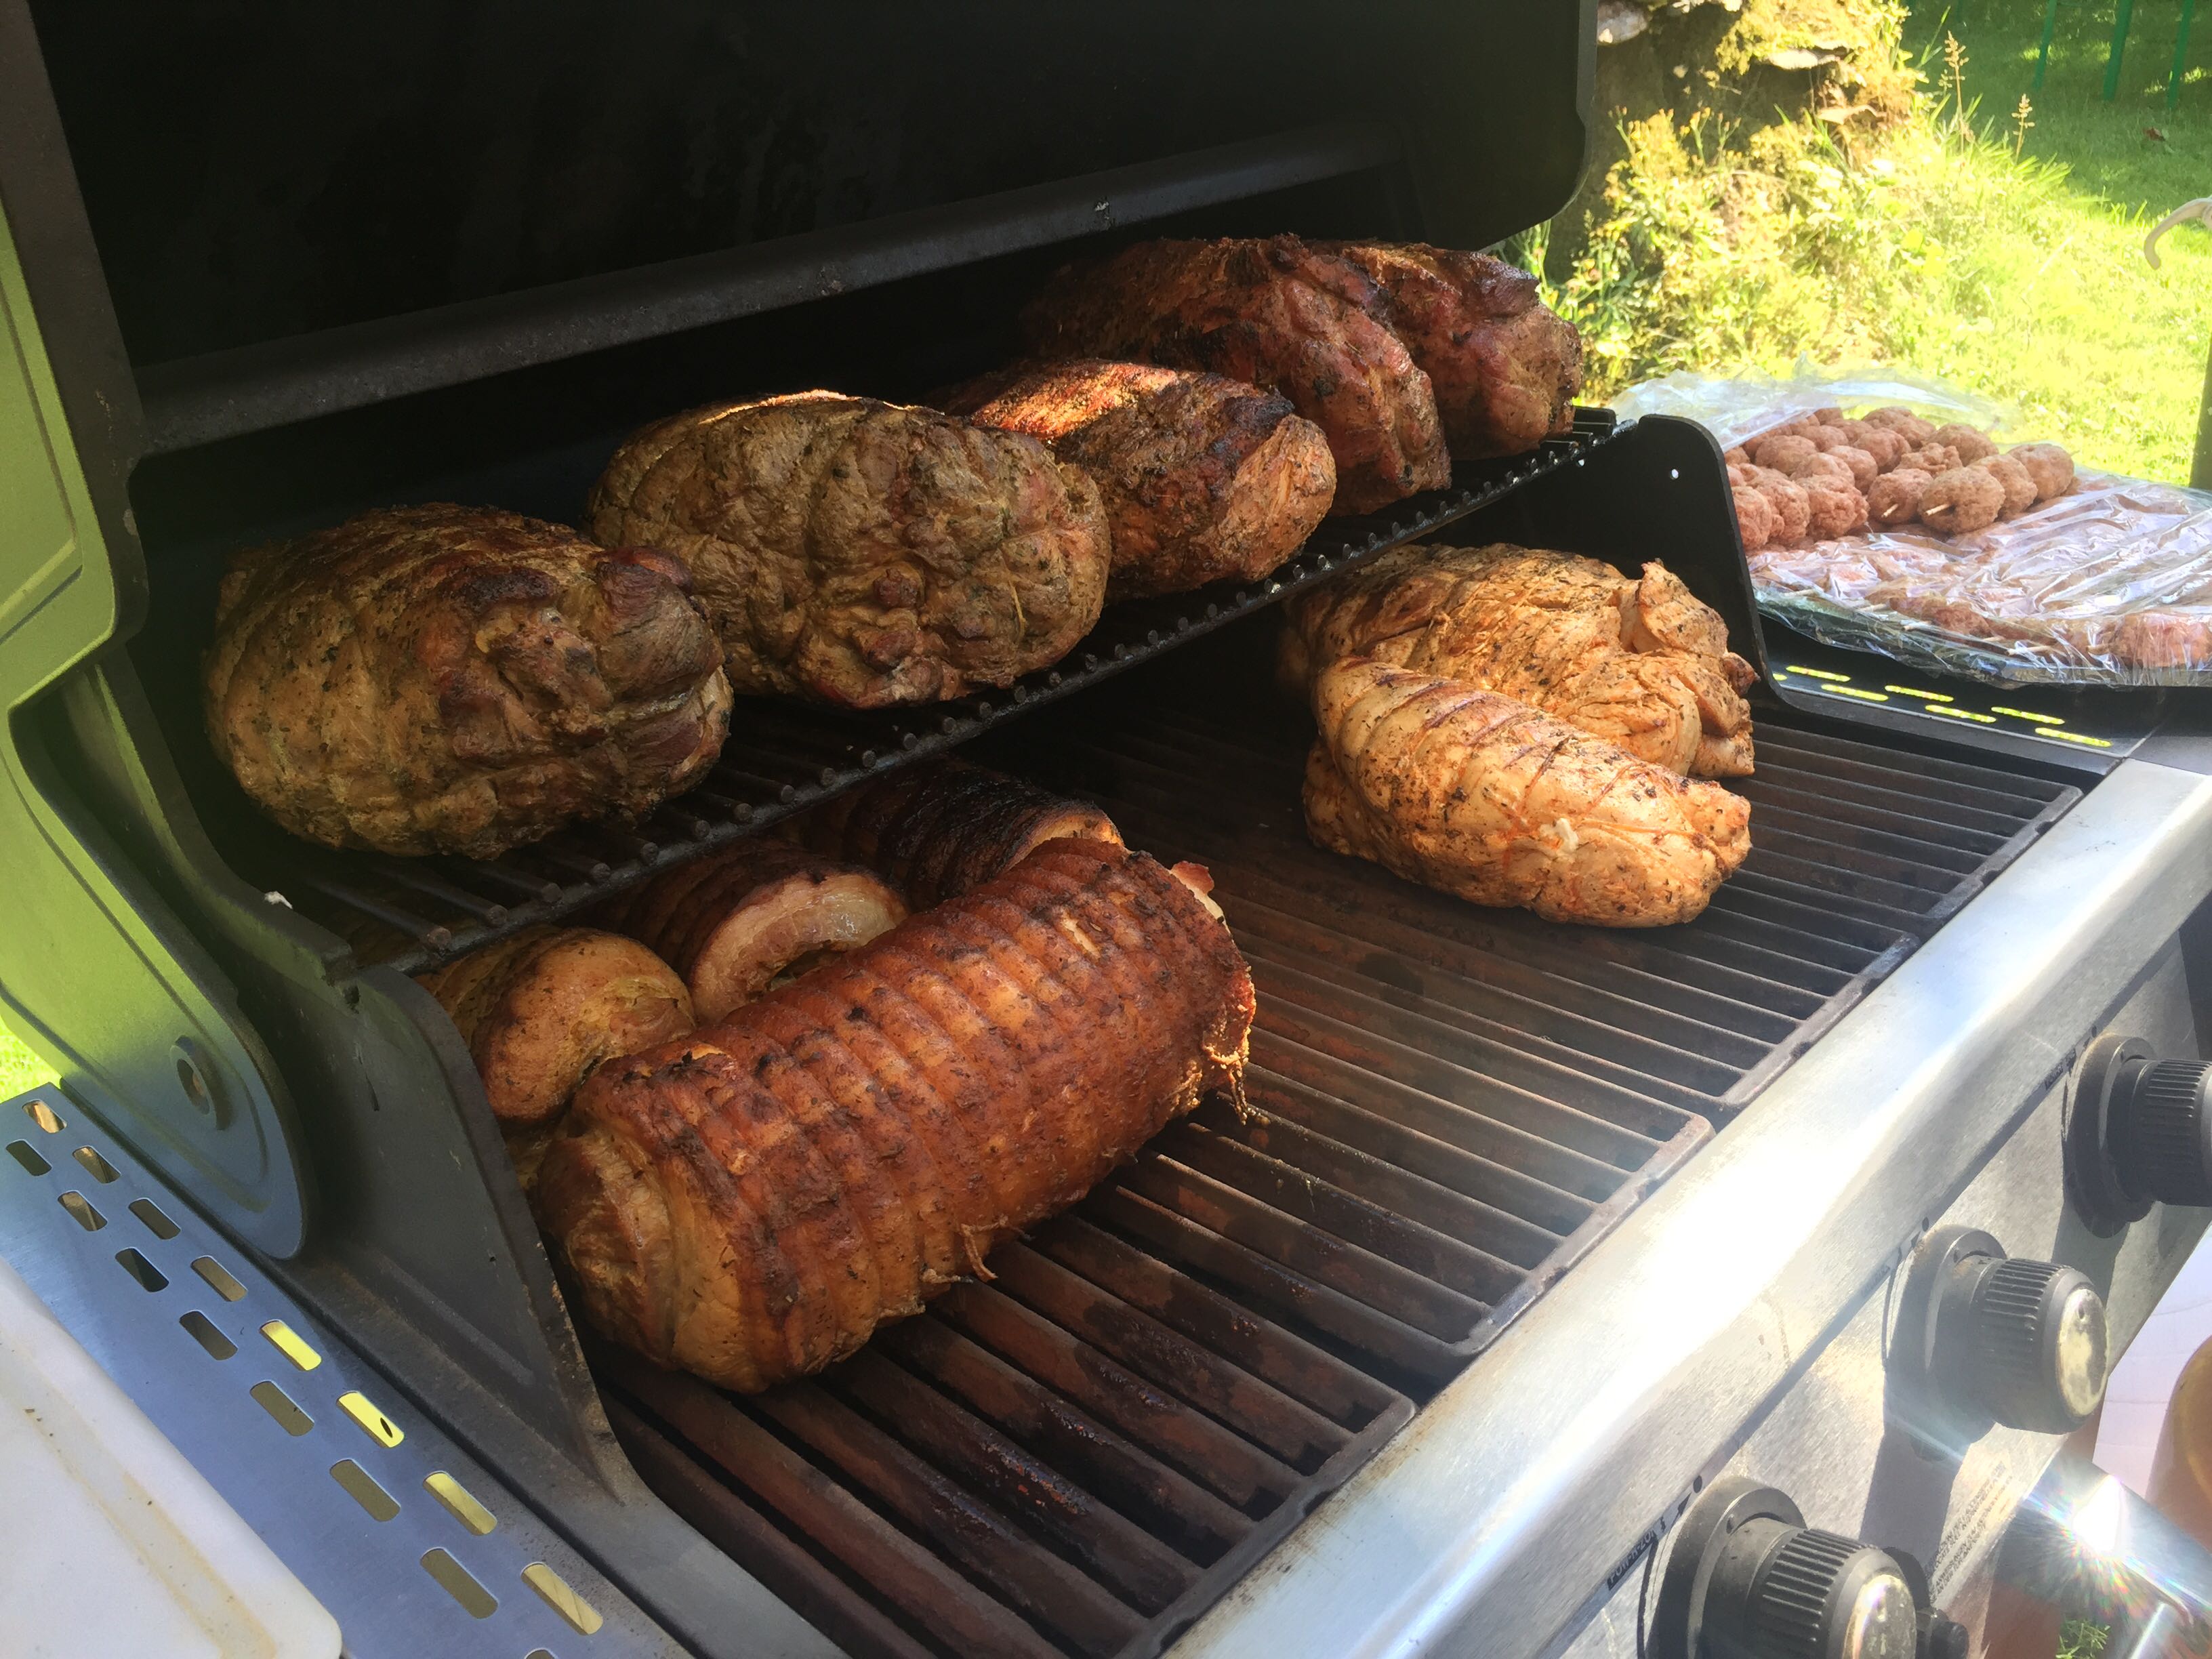 2018 Grillabend 5